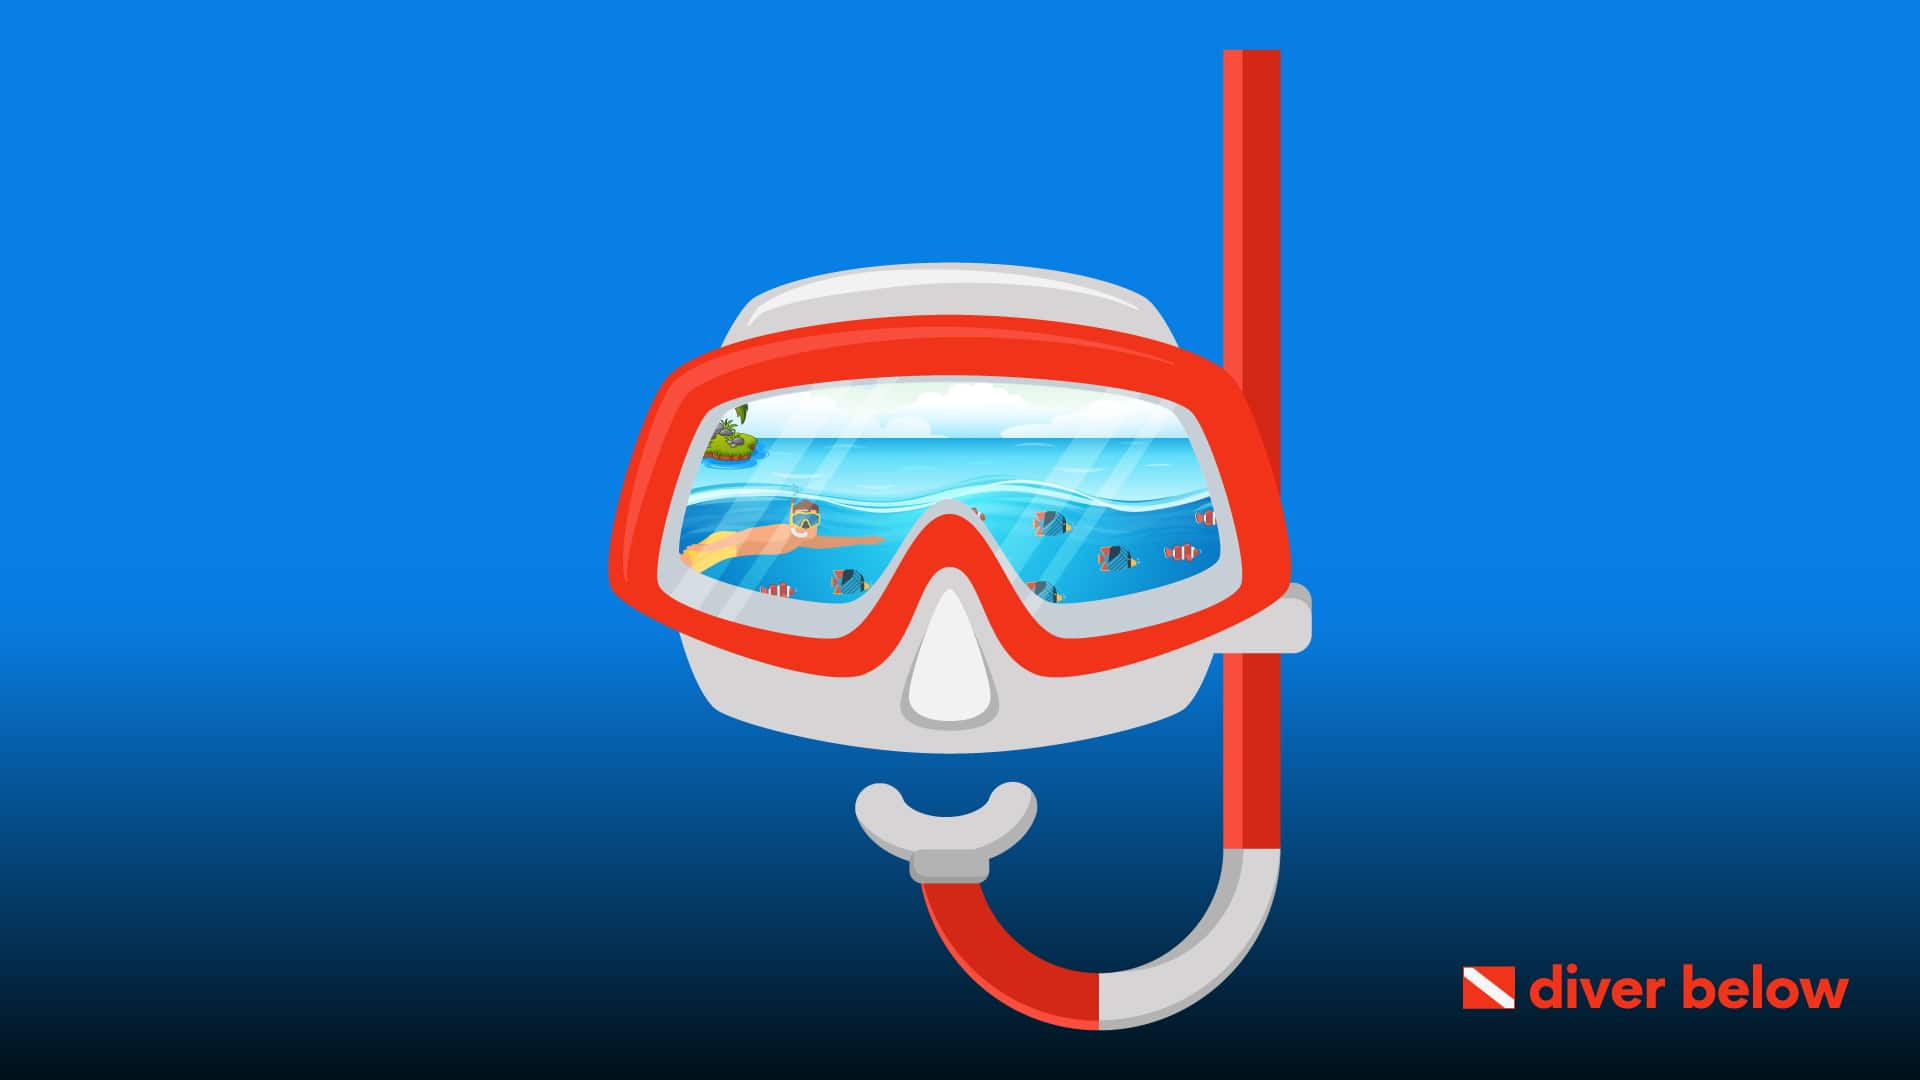 vector graphic showing a snorkel and snorkel mask